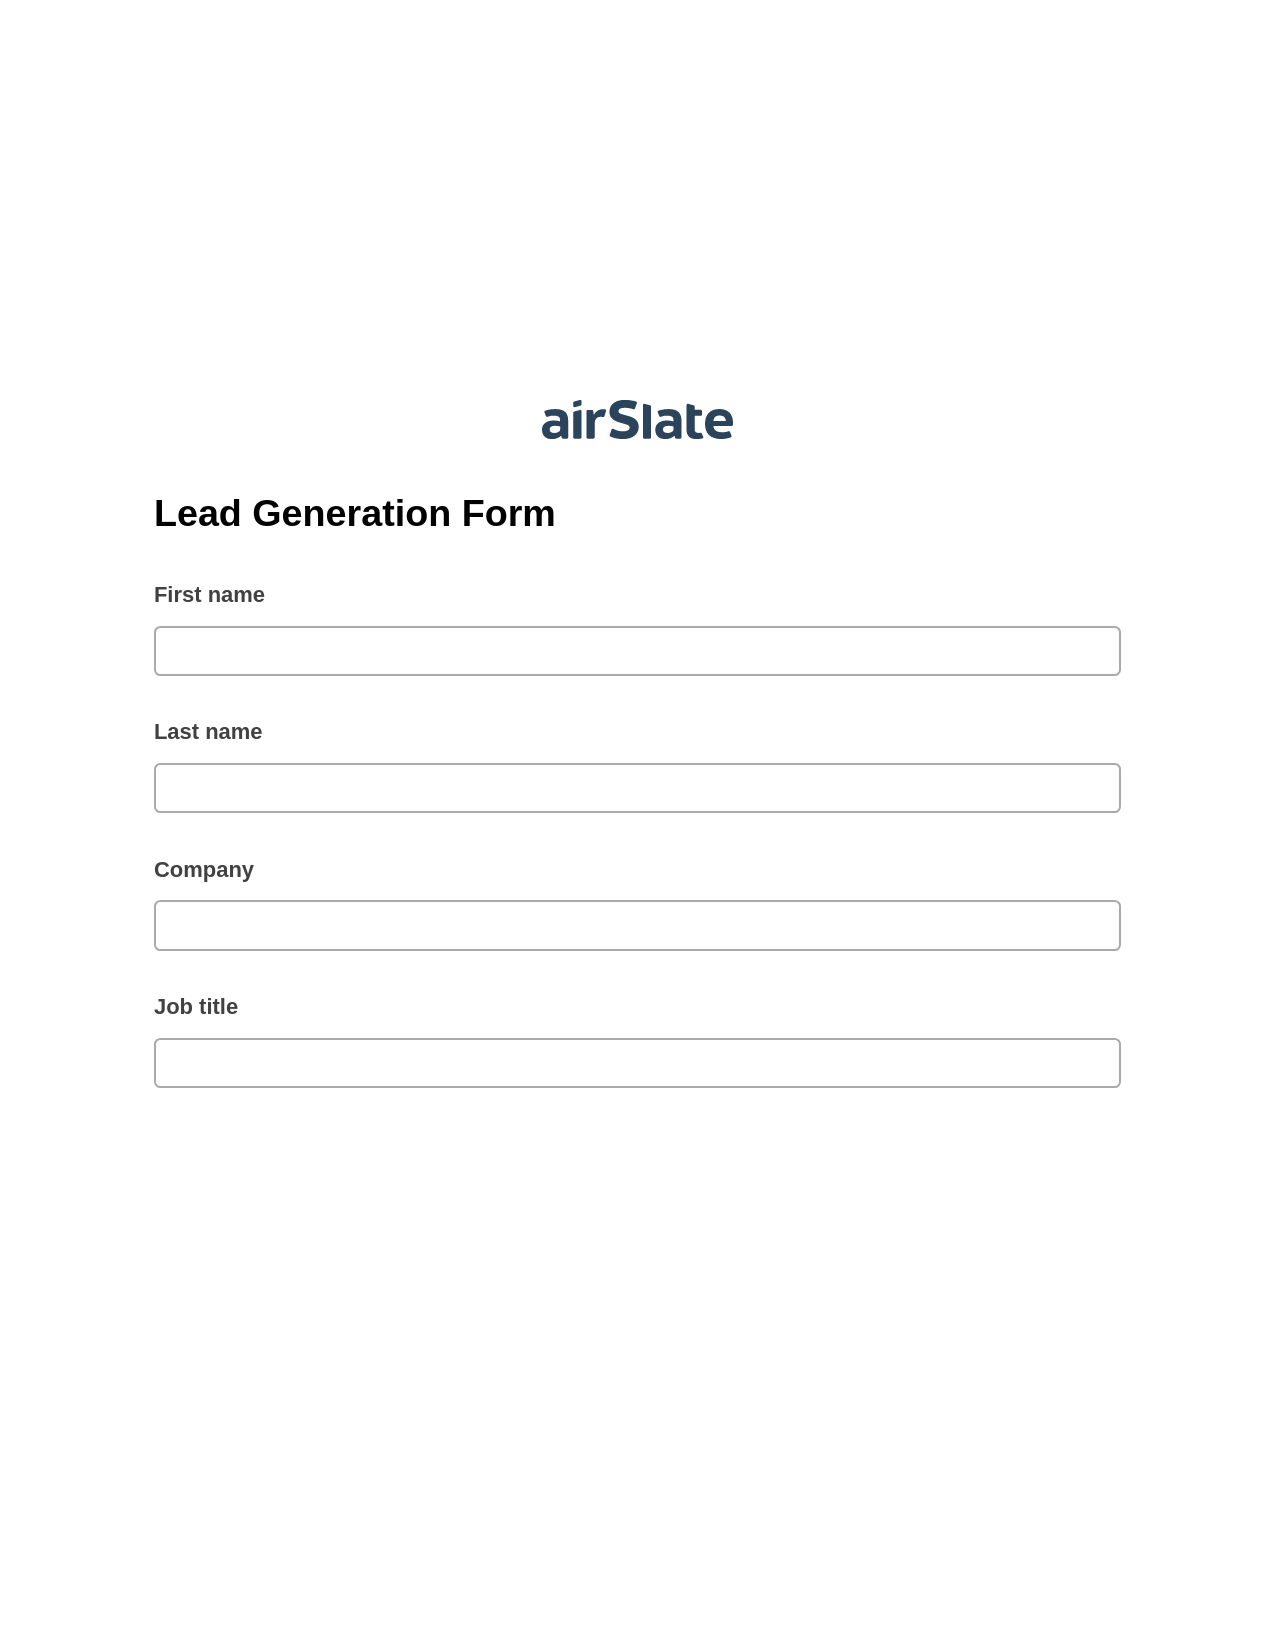 Lead Generation Form Pre-fill Dropdowns from CSV file Bot, Remove Tags From Slate Bot, Archive to SharePoint Folder Bot